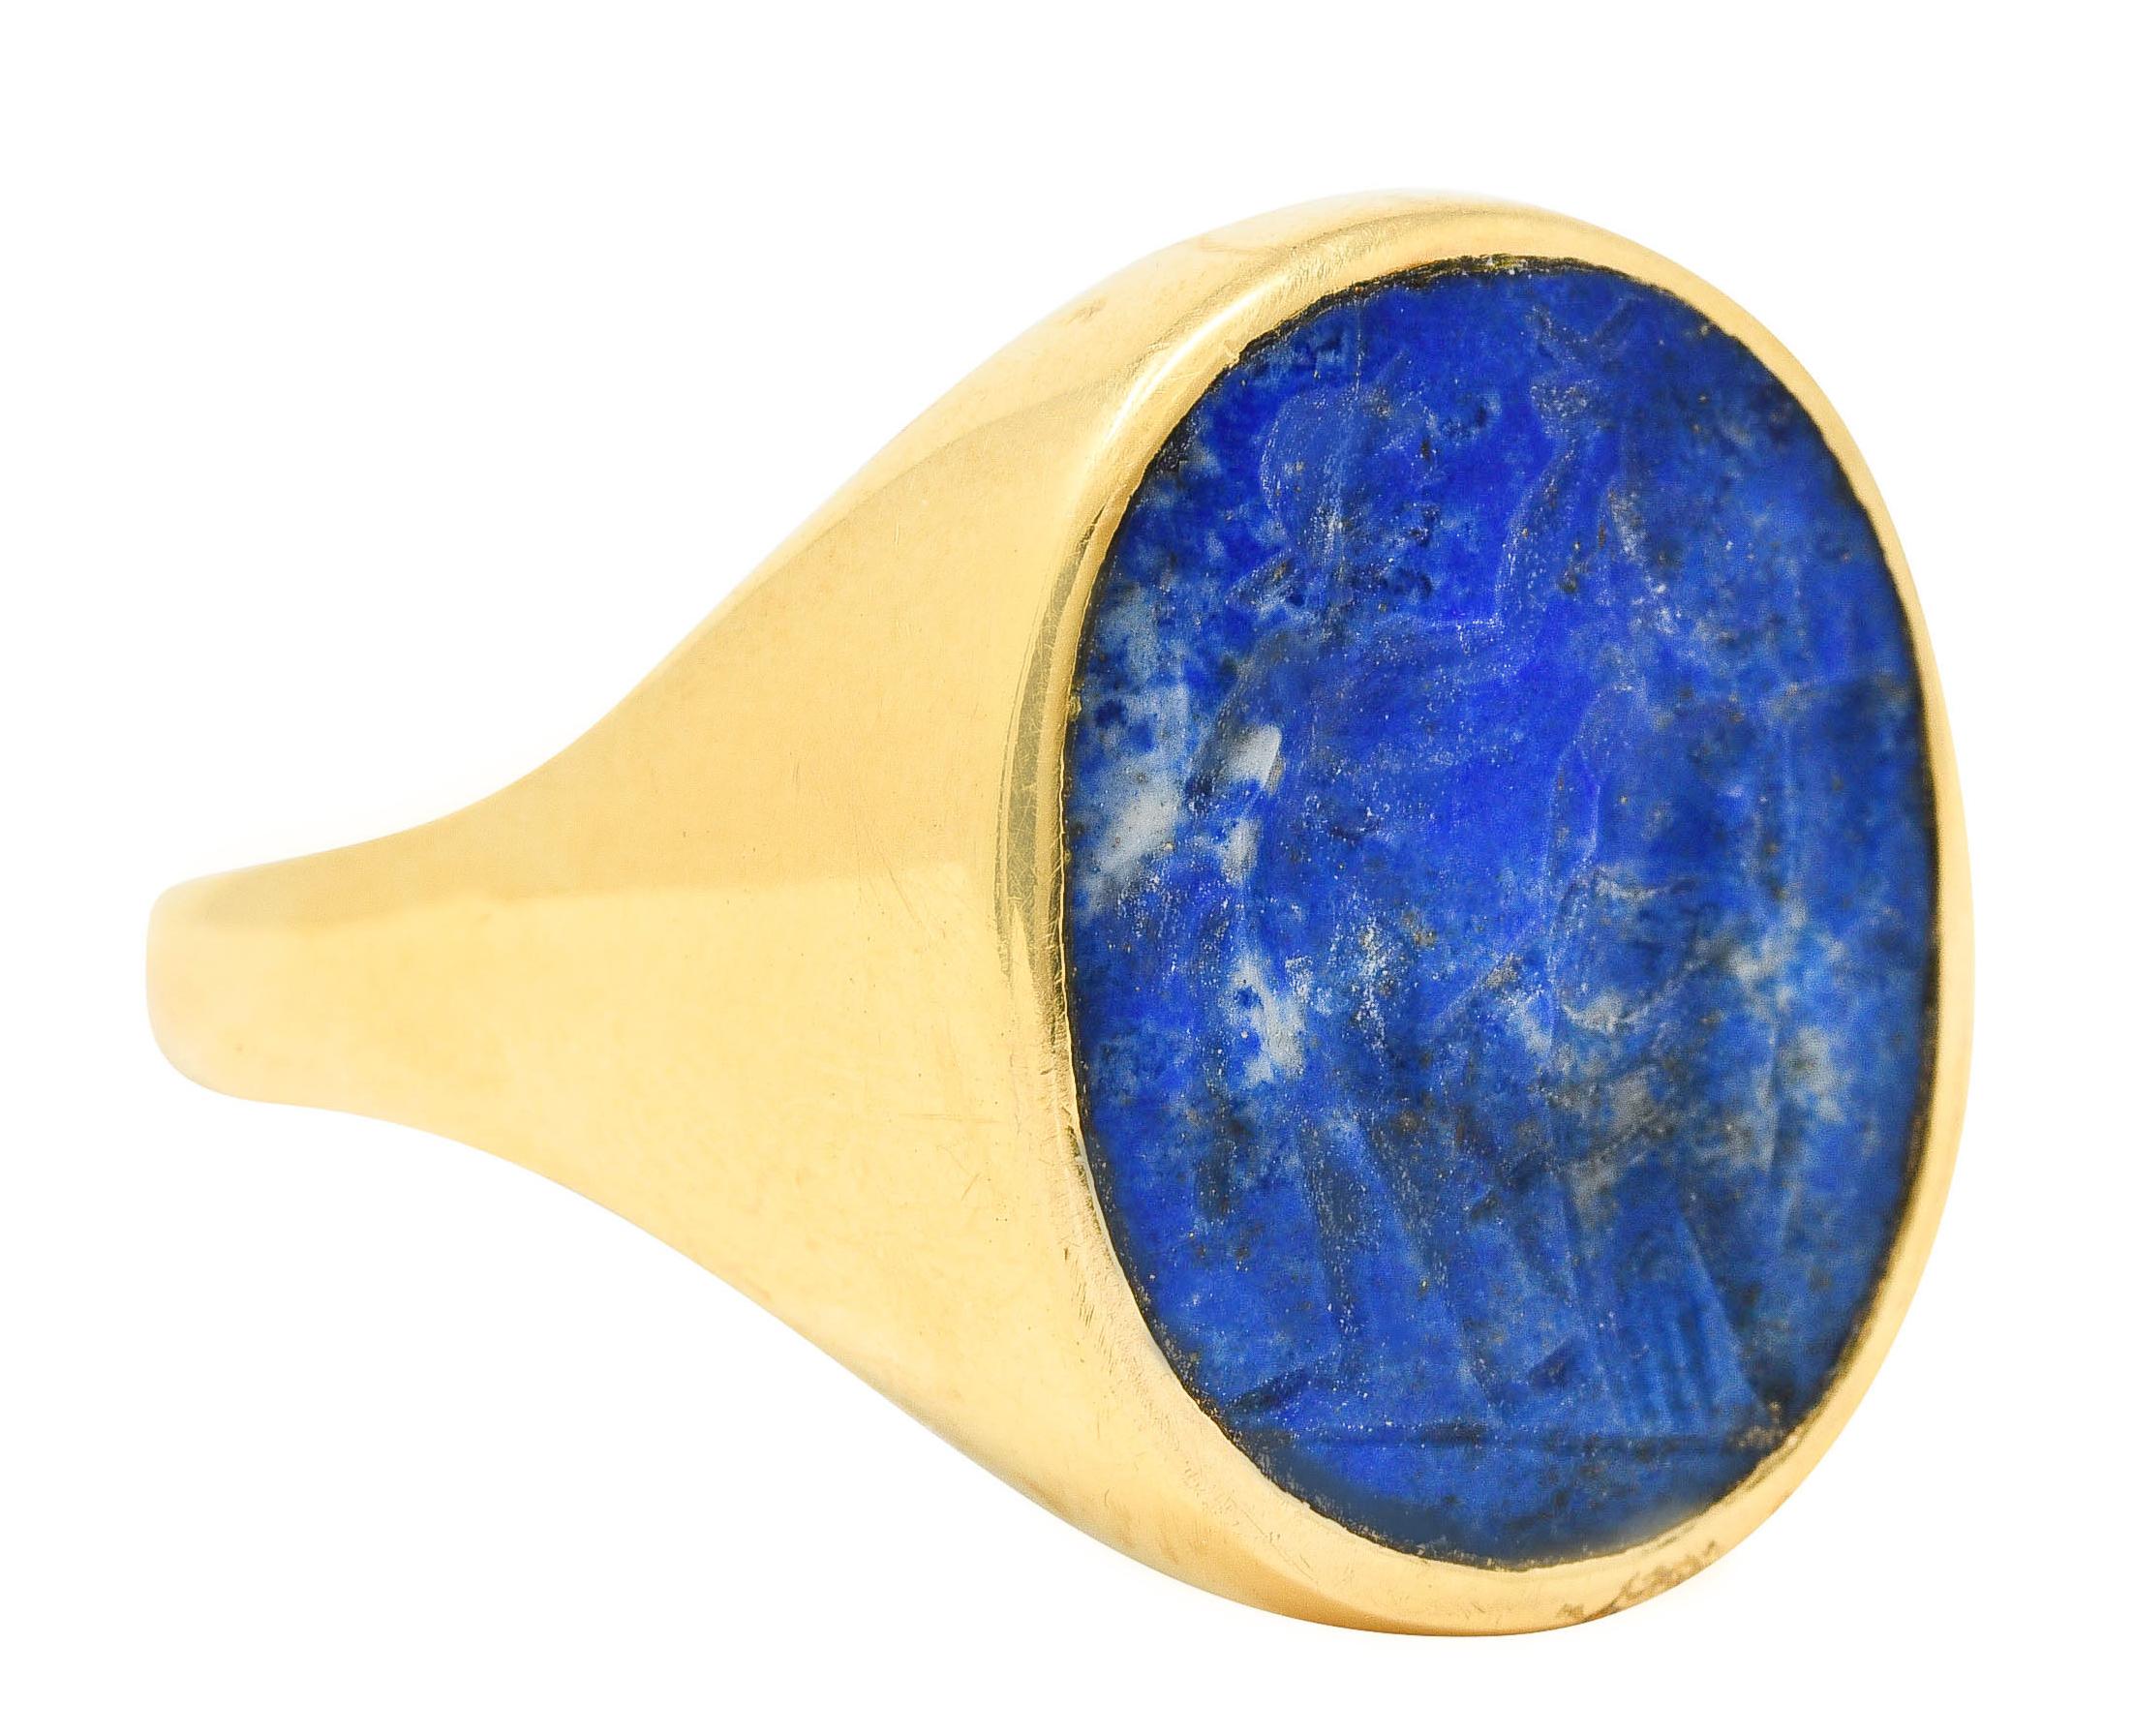 Signet ring centers a bezel set oval shaped lapis lazuli slab with an intaglio carving of two figures

Opaque ultramarine blue with white mottling and subtle pyrite flecking - measuring 17.0 x 13.0 mm

Figures are depicted in draped clothing with